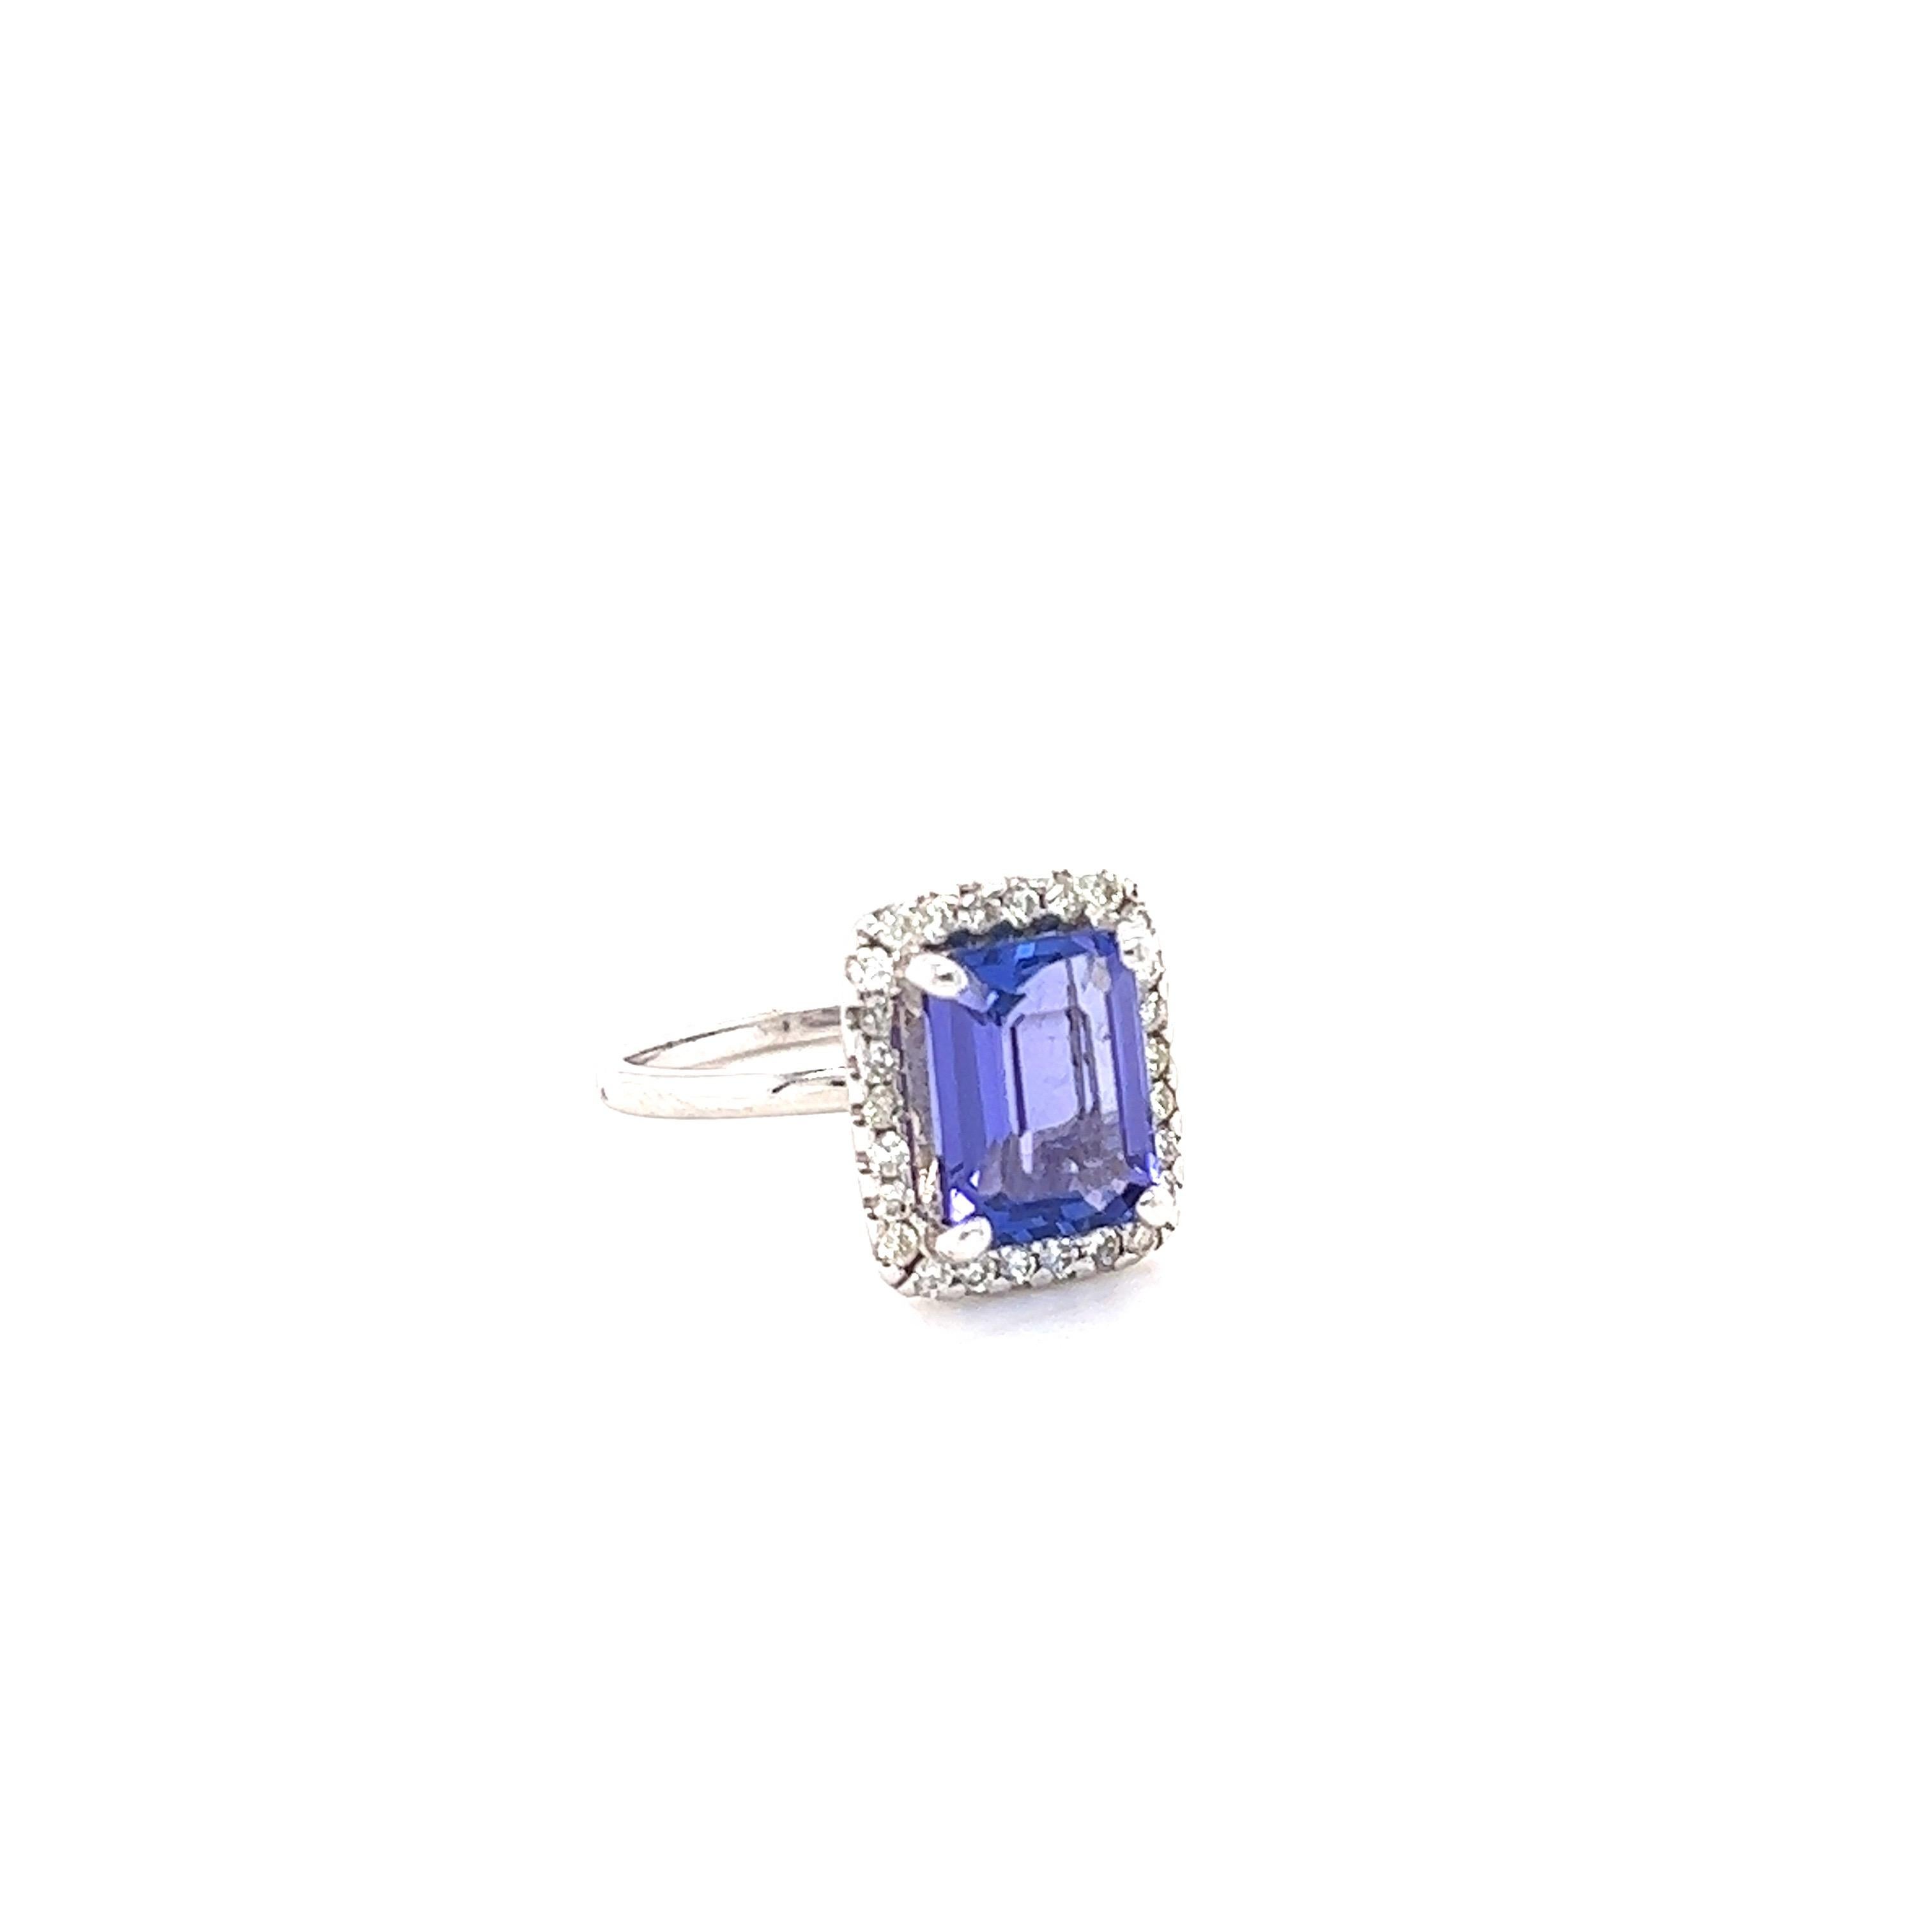 This ring has a radiant purple Emerald Cut Natural Tanzanite weighing 4.11 Carats. The Tanzanite measures at 10 mm x 8 mm. It is surrounded by 26 Round Cut Diamonds that weigh 0.38 Carats. The clarity and color of the diamonds are SI-F. The total